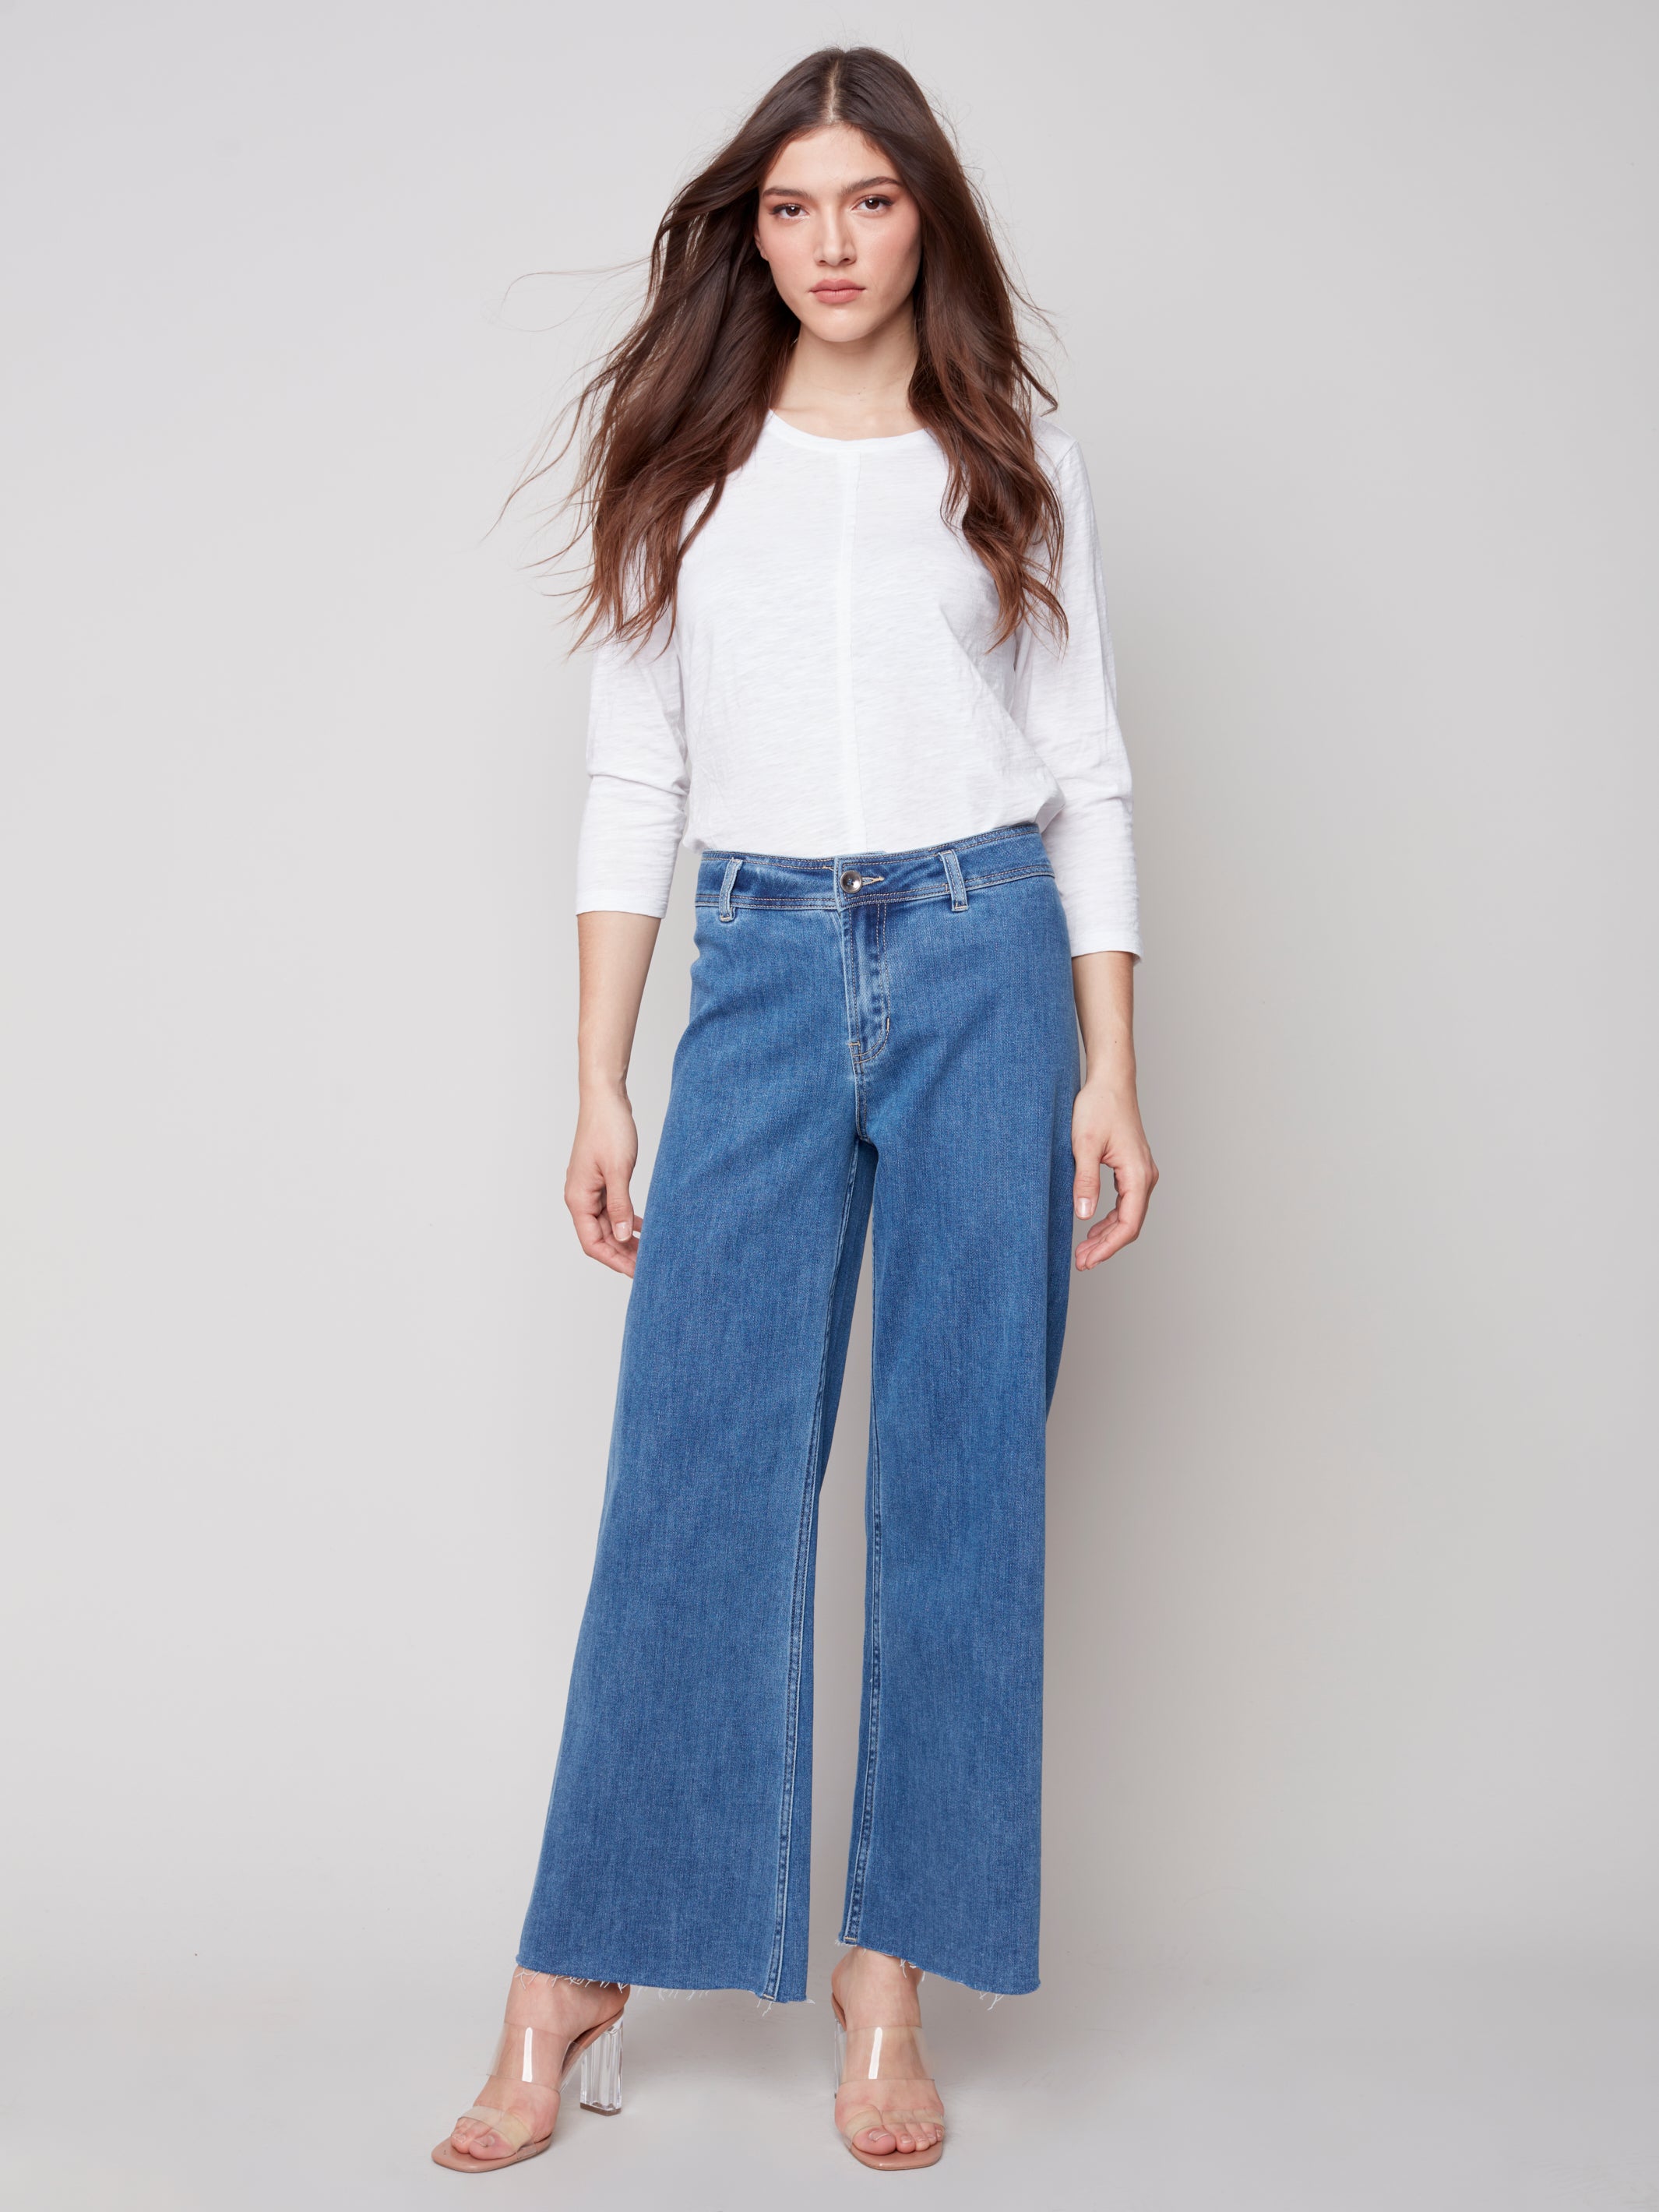 Charlie B - Skinny Jeans with Embroidered Scalloped Hem - Castles